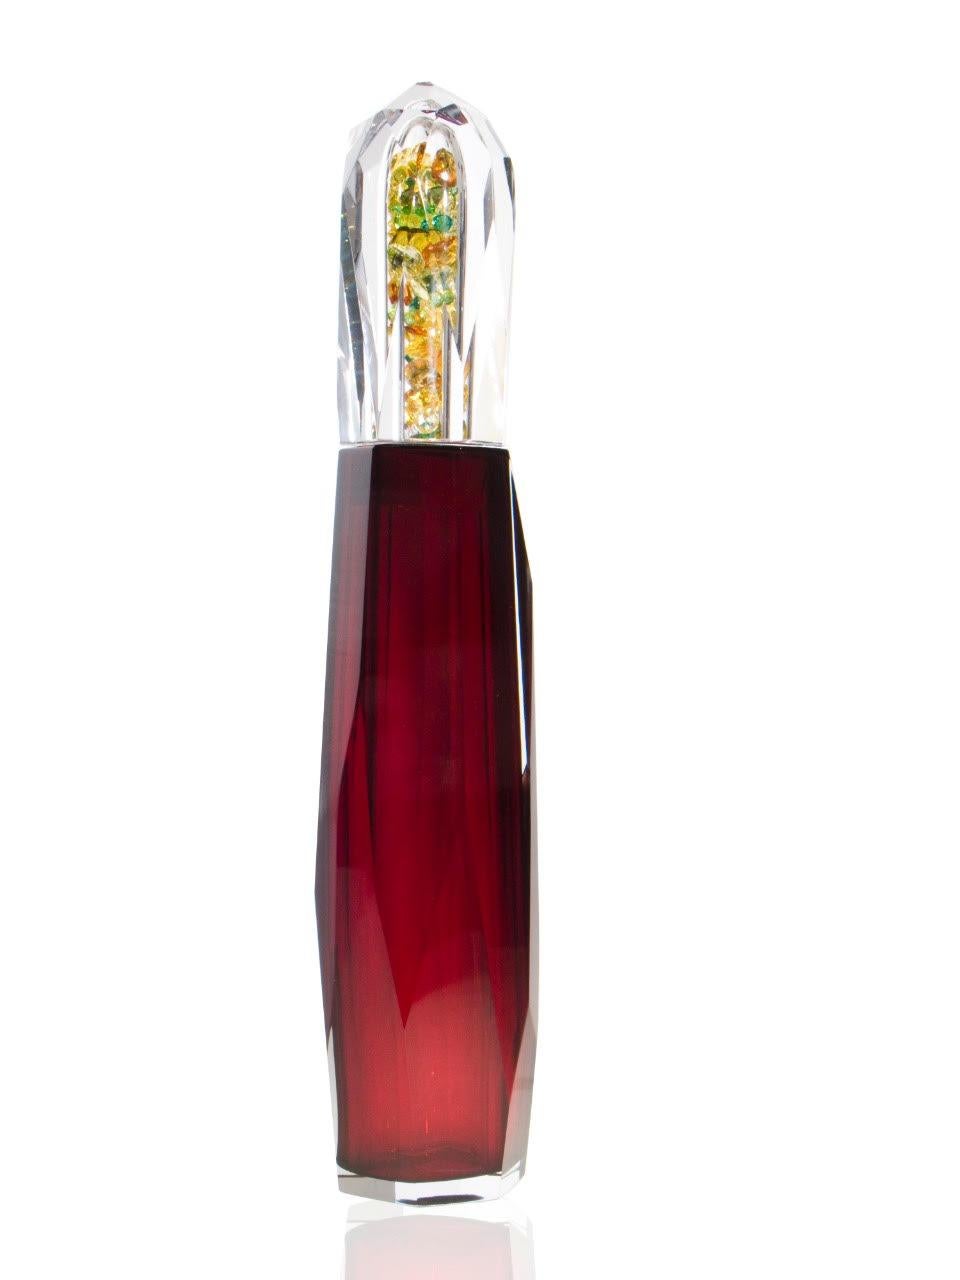 Limited edition designed and produced by Orfeo Quagliata in collaboration with Swarovski.

This Art Glass martini shaker is one in a series of 5 designed for the launching of the movie Sex and The City 2. 

Blown and hand carved colored glass